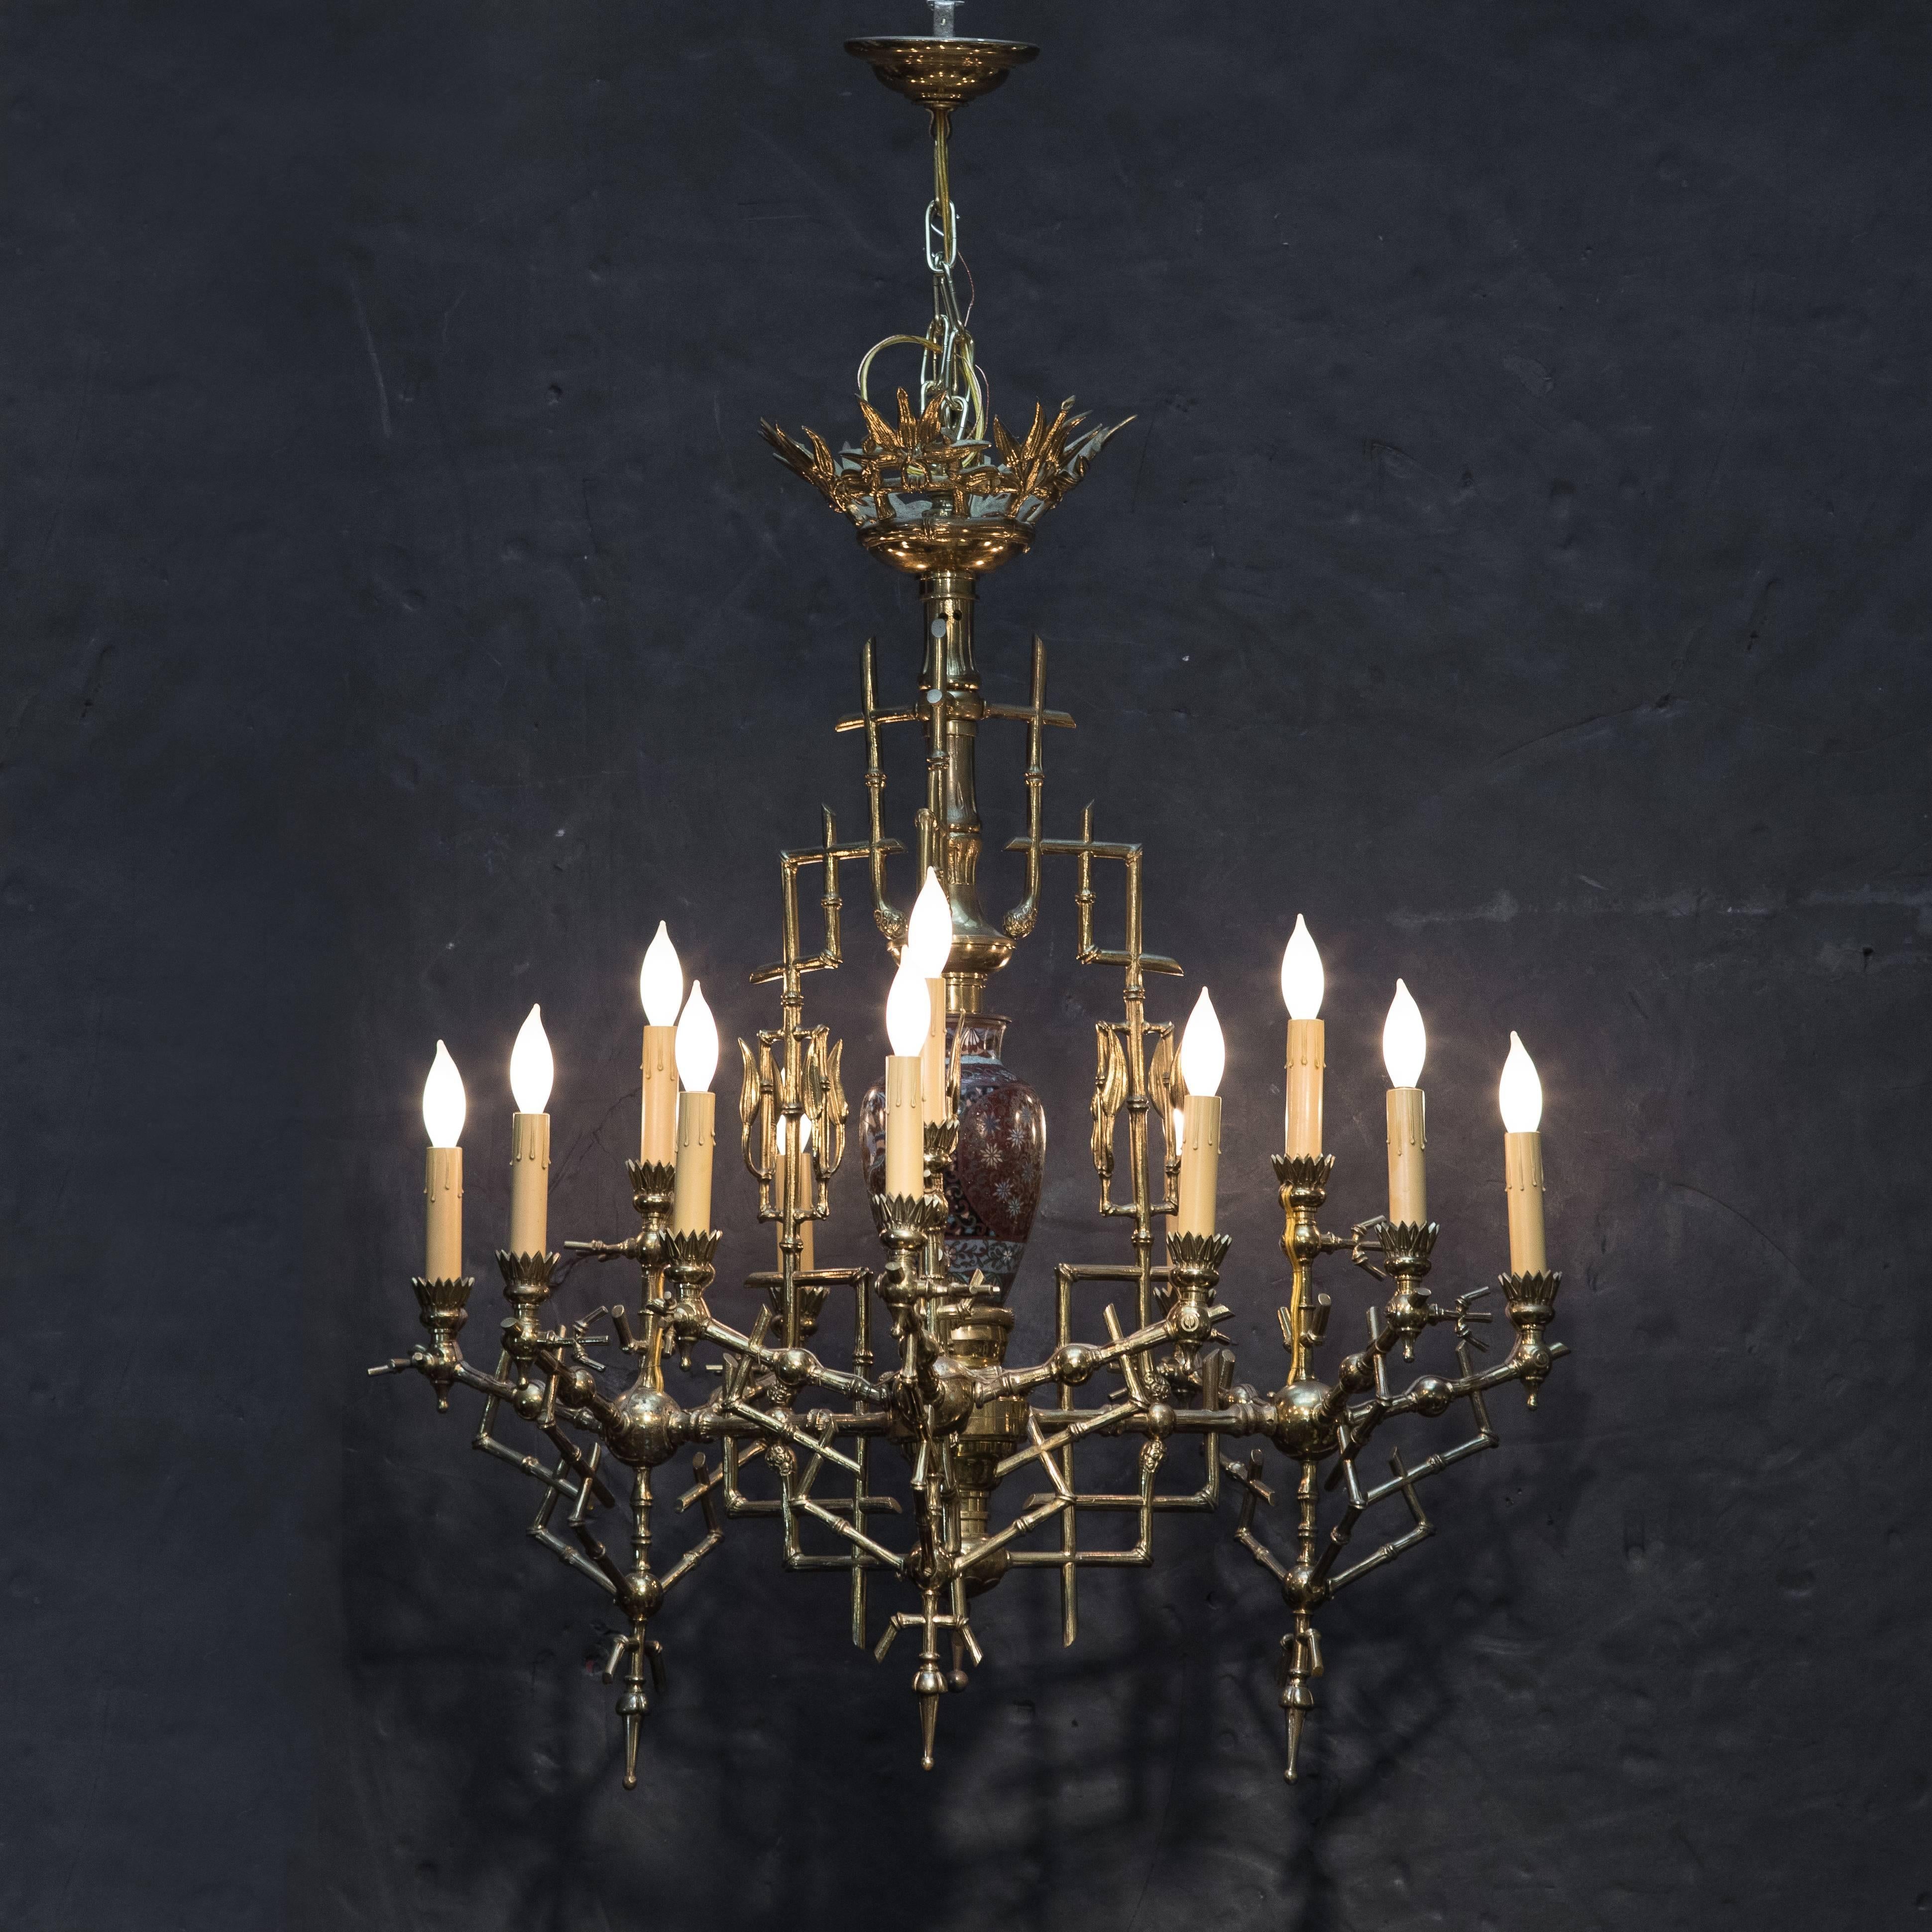 A stunning antique faux bamboo brass, three-arm, twelve-light chandelier.
The brass structure of the chandelier formed as geometric bamboo segments. The body of the chandelier featuring a mounted antique Japanese cloisonné vase.
With three arms,